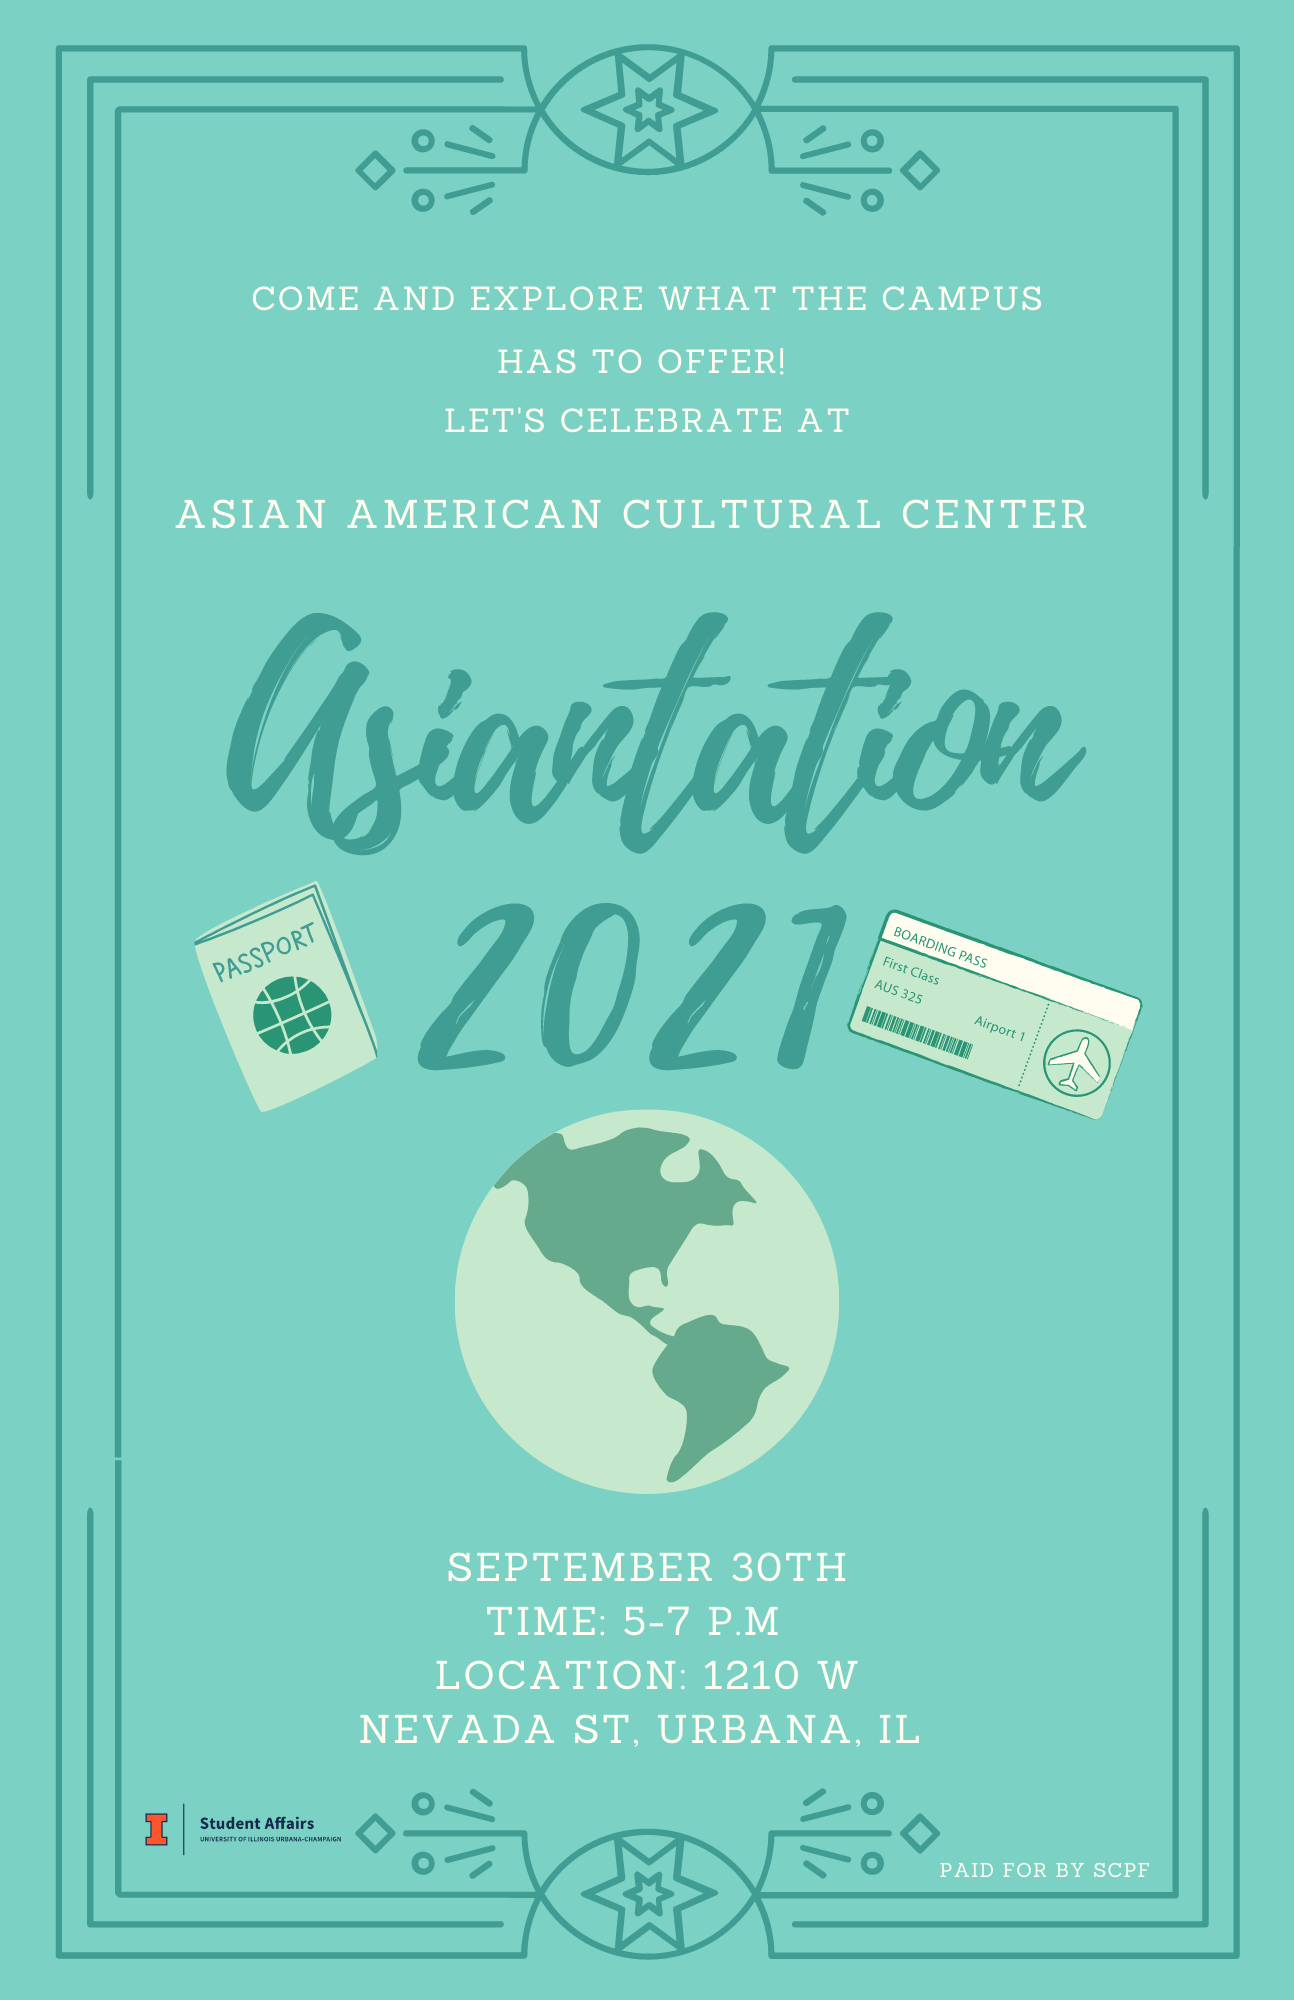 Asiantation flyer, visit us on September 30th 5-7pm at the AACC. Learn about resources, talk with RSOs on how to become involved on-campus, and enjoy FREE performances